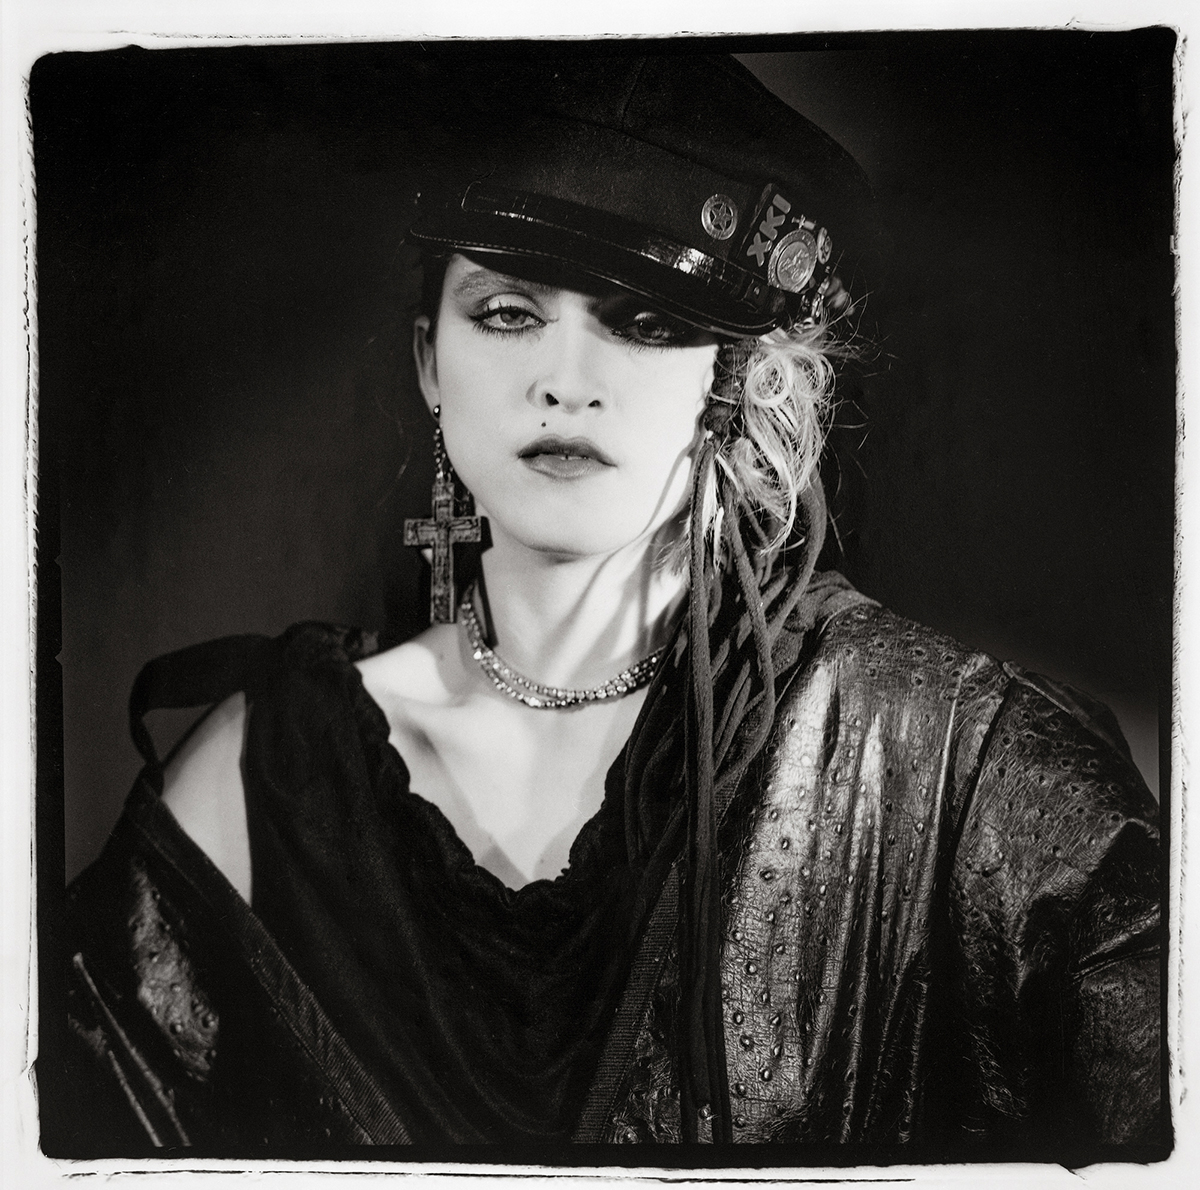 Madonna in a black dress and hat